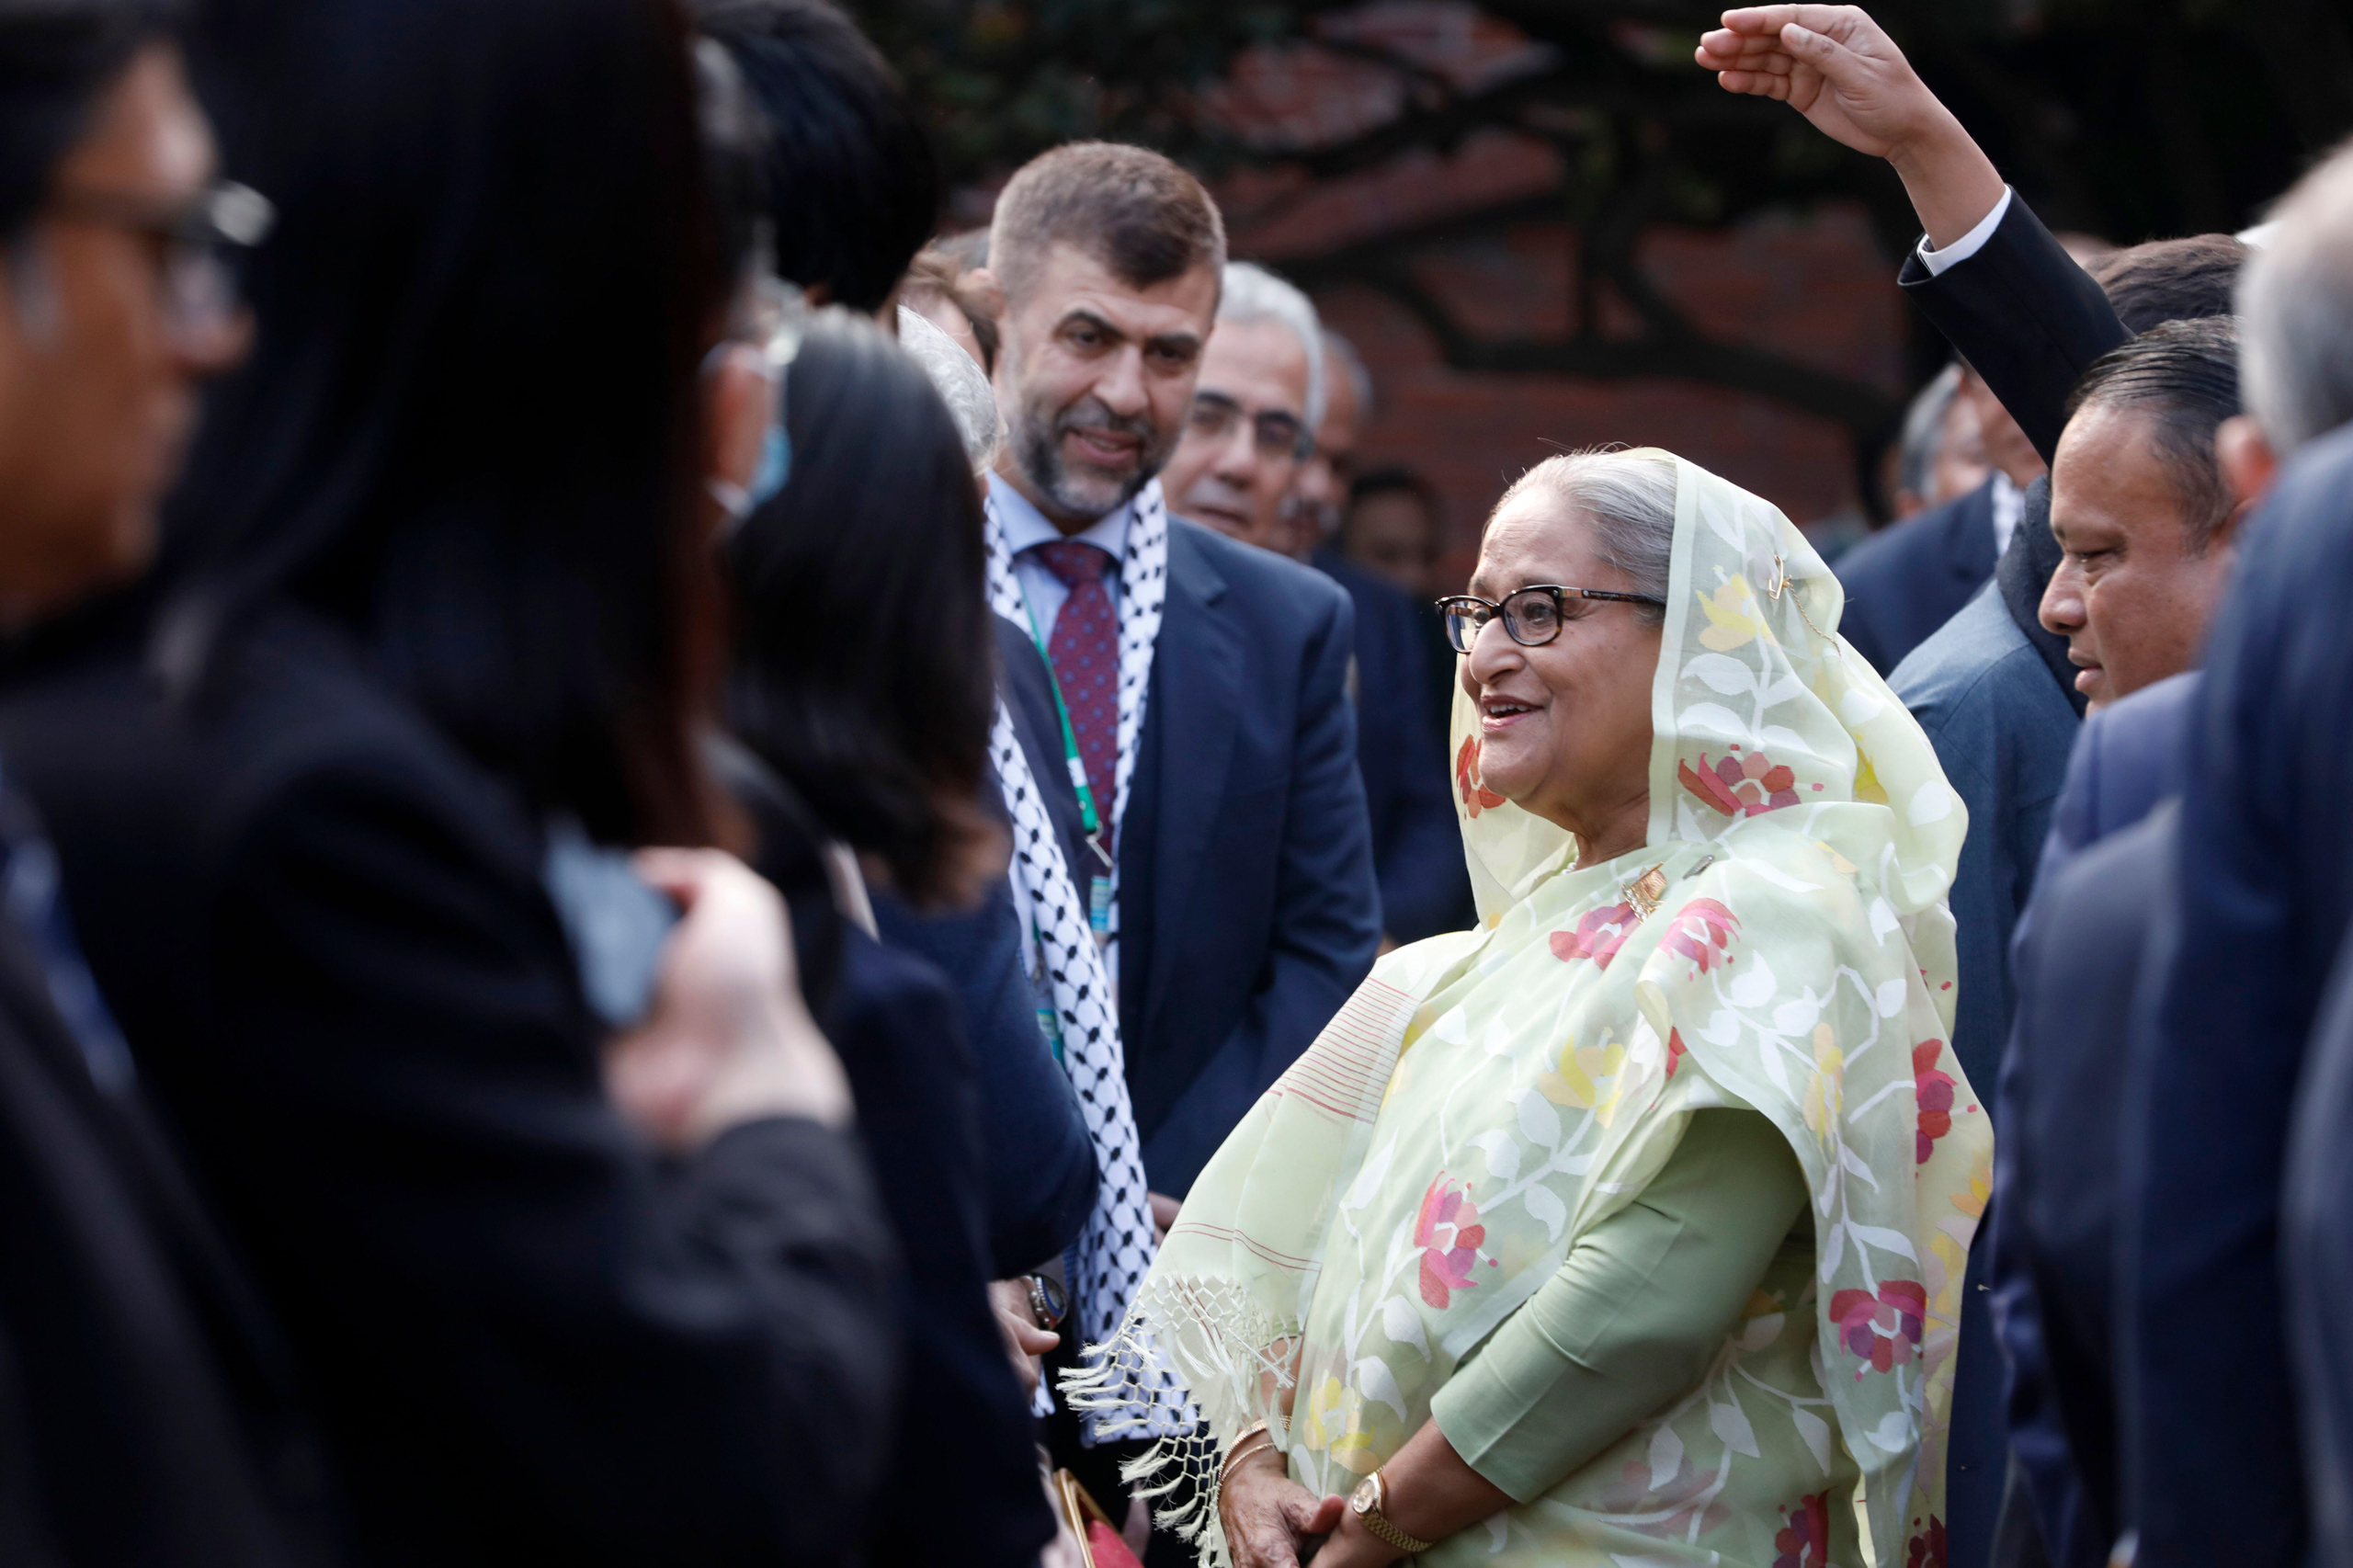 <p>Bangladesh Prime Minister Sheikh Hasina has <a href="https://www.bssnews.net/news/165180">said</a> her government will continue to cooperate with neighbouring countries, including on issues of cross-border communication, transit, energy partnerships and equitable water sharing. (Image: SK Hasan Ali / Alamy)</p>